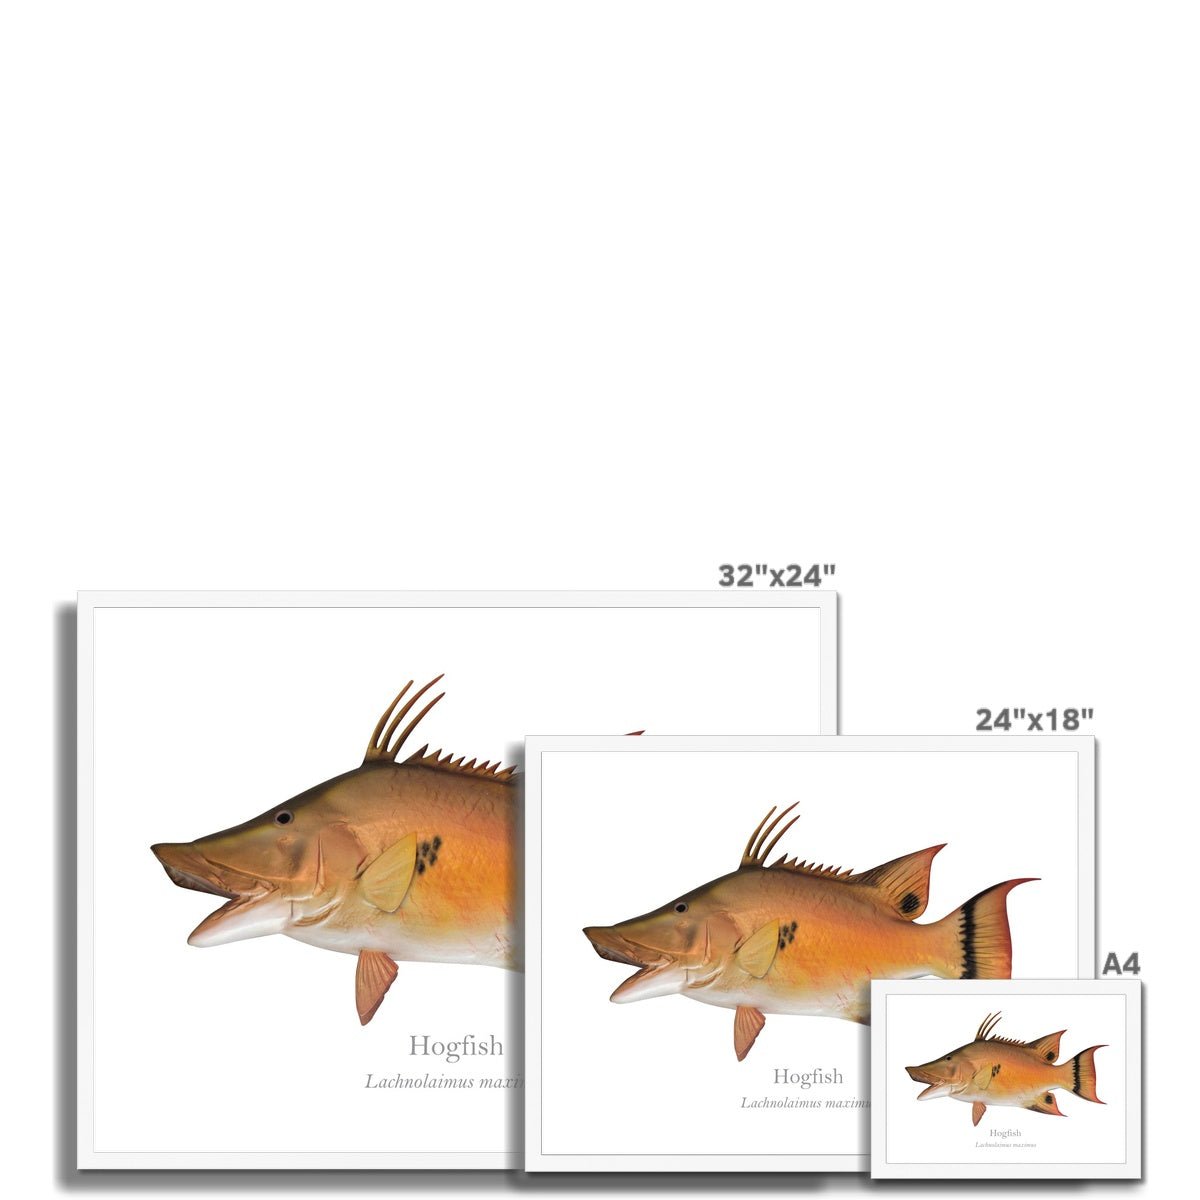 Hogfish - Framed Print - With Scientific Name - madfishlab.com